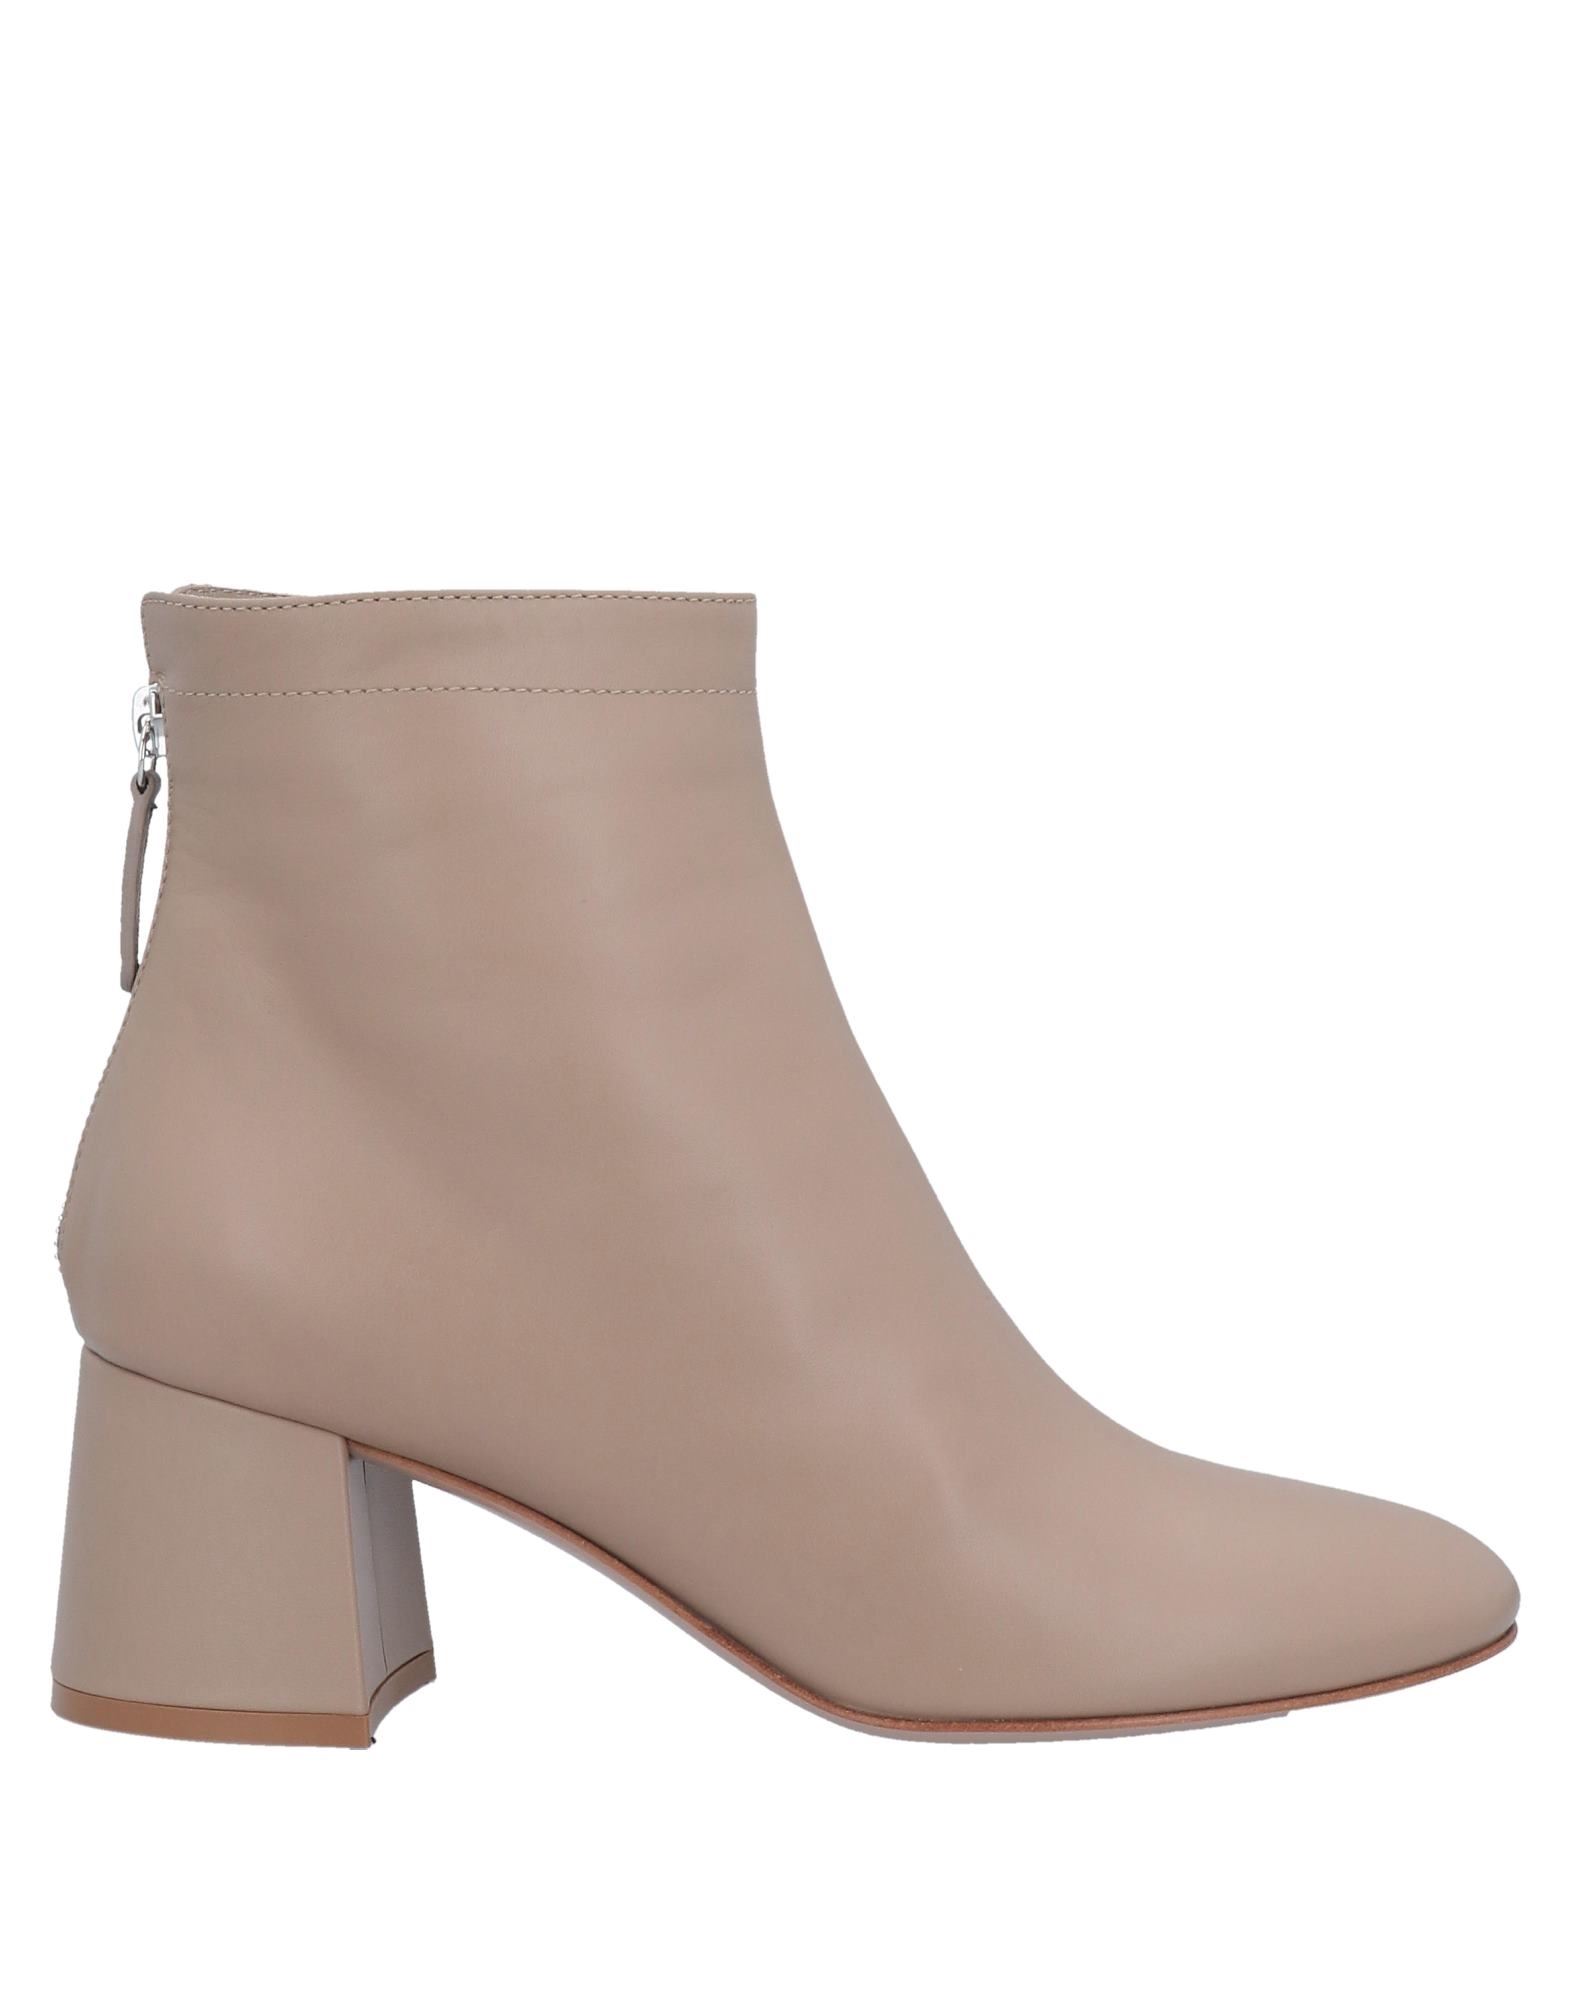 Gianvito Rossi Ankle Boots In Sand